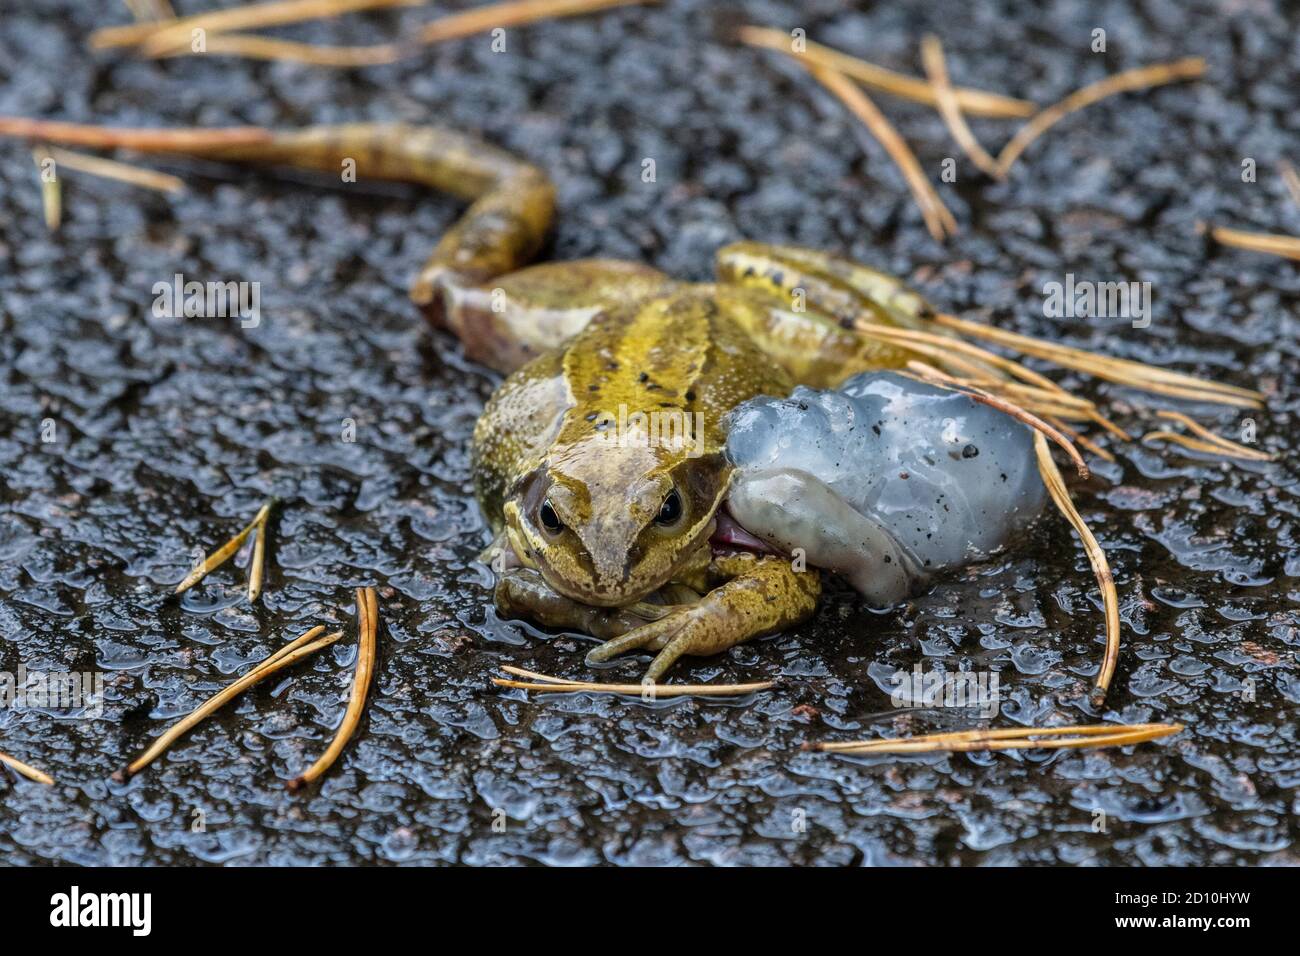 Dead common frog - Rana temporaria - on wet road after heavy rain in UK.  Swollen ovum jelly (star jelly) protruding from frog alongside intestines Stock Photo